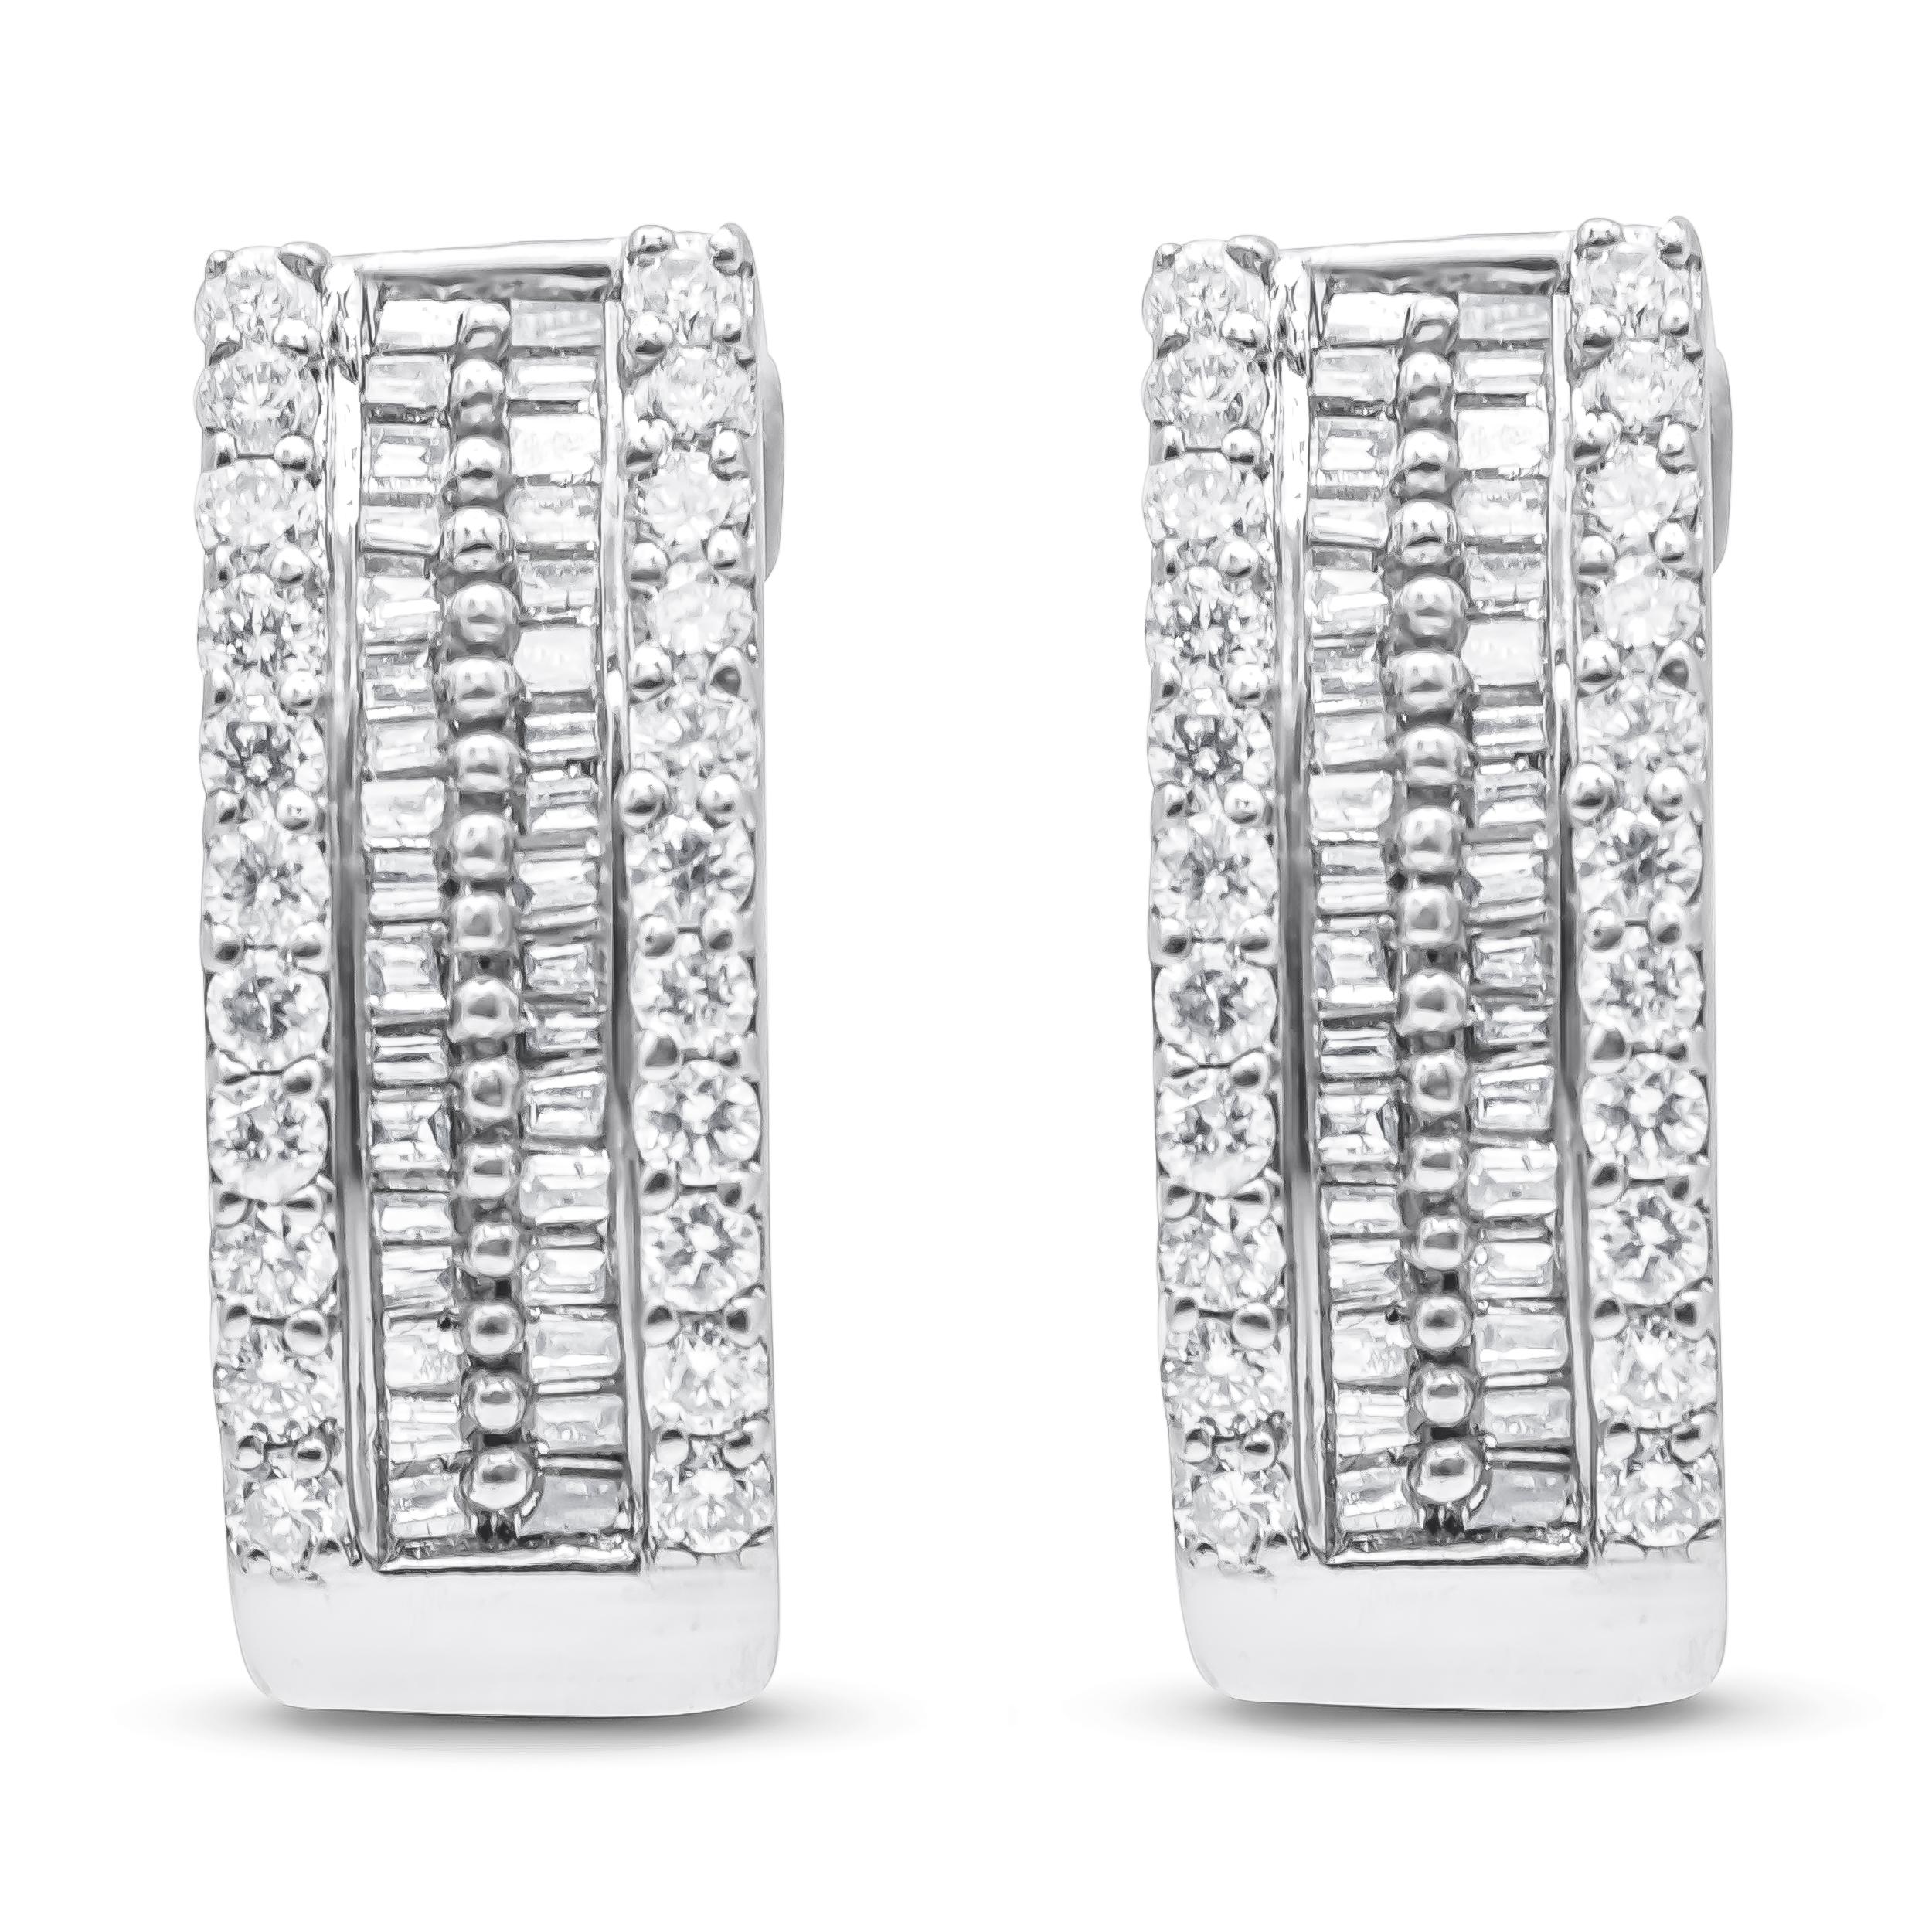 Experience the epitome of elegance with our 14K white gold diamond hoop earrings. Adorned with a breathtaking total of 108 natural diamonds, including 44 round and 64 baguette-cut gems, these earrings exude opulence. With a total weight of 1.5